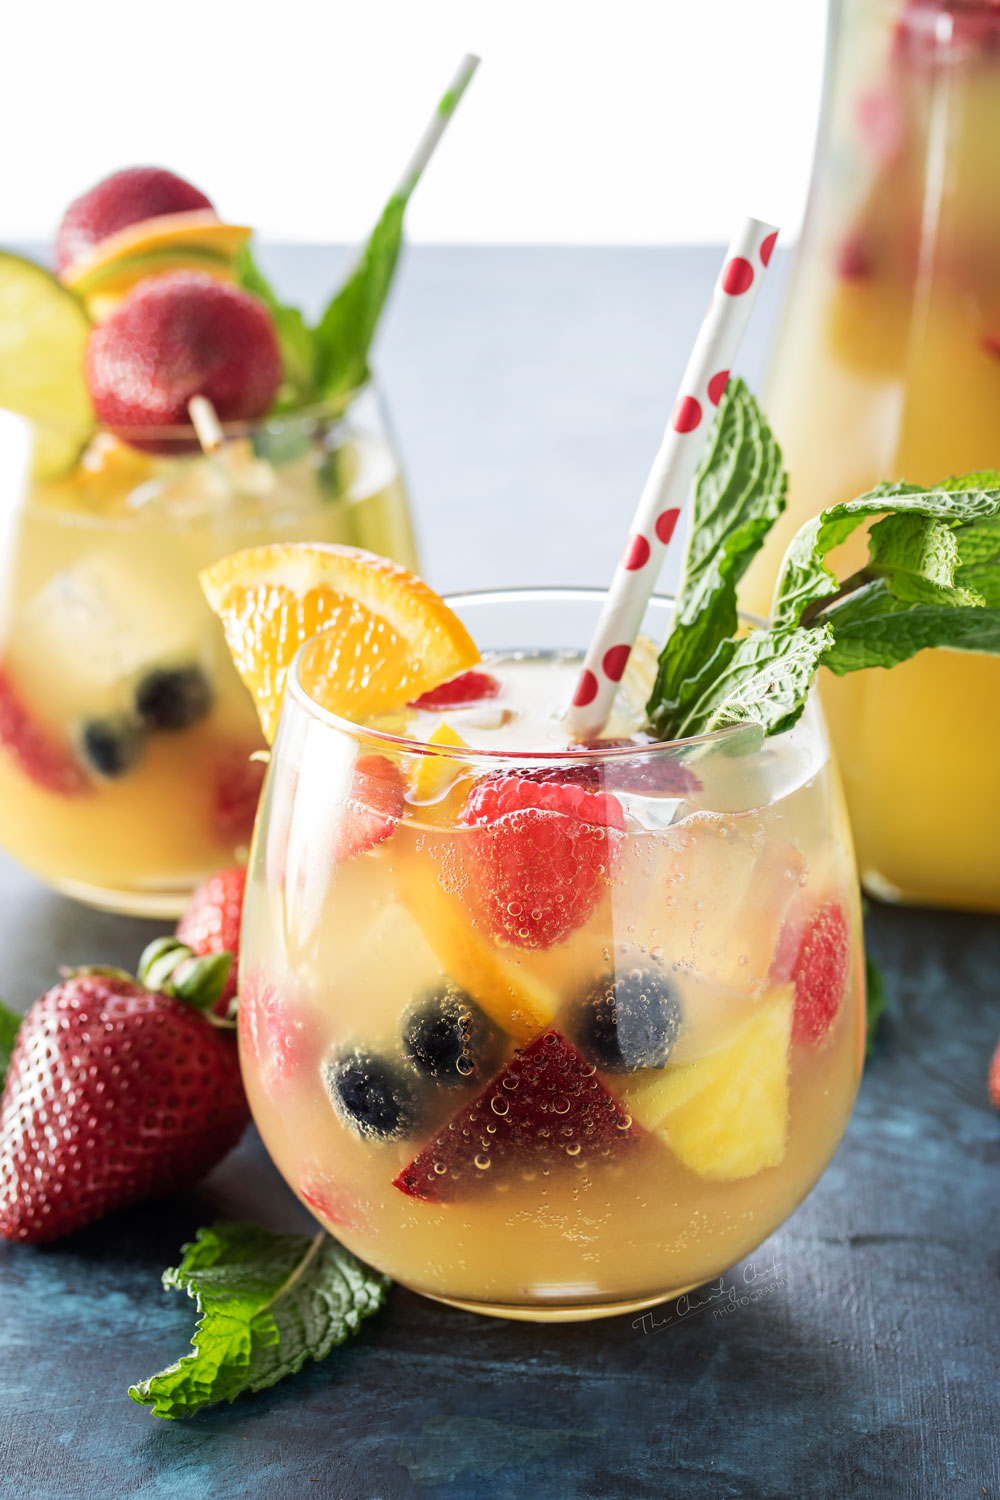 Summer Pineapple Punch | 25+ Non-Alcoholic Punch Recipes